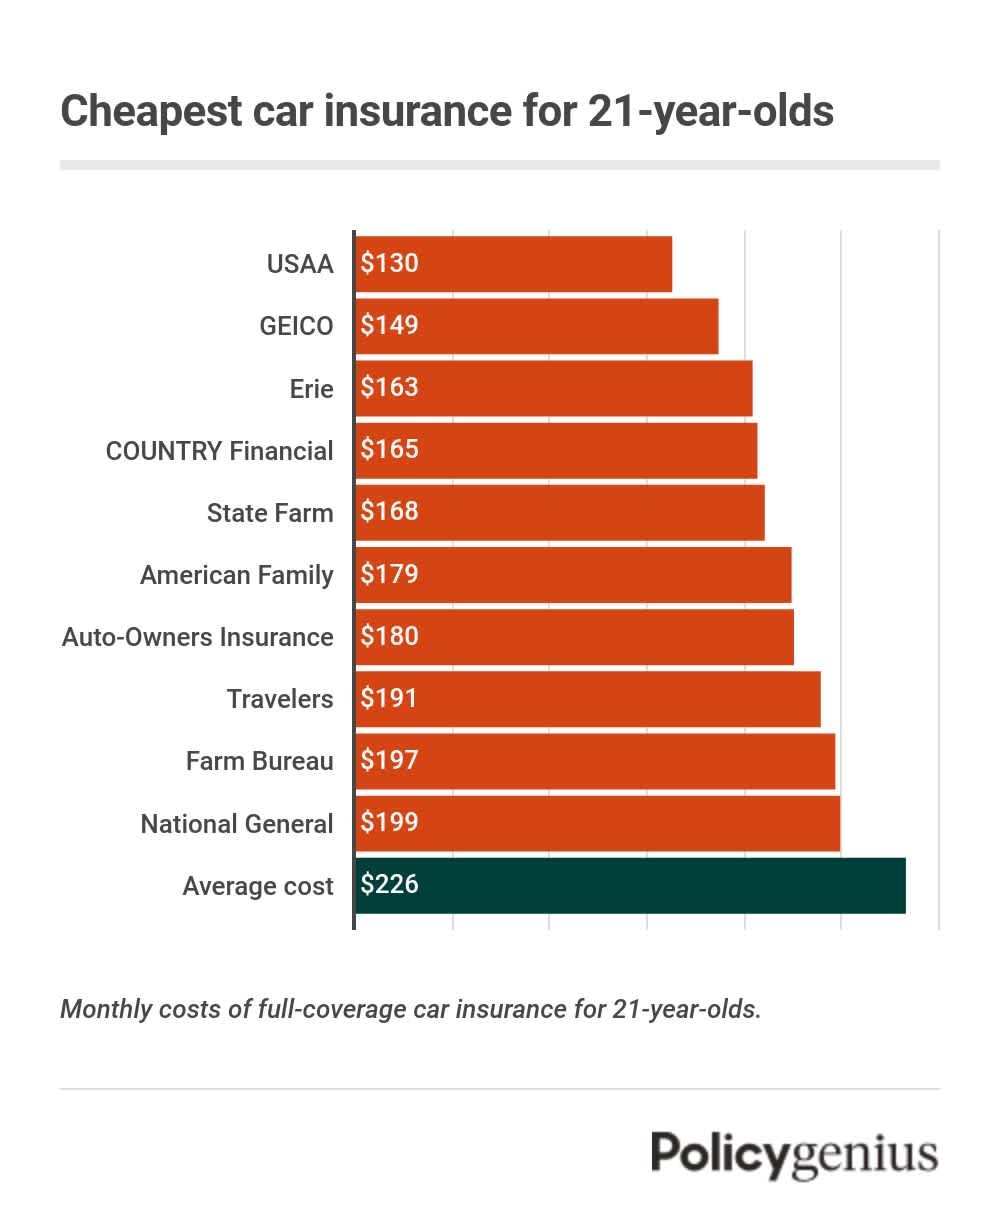 Cost of insurance for 21-year-olds - IG